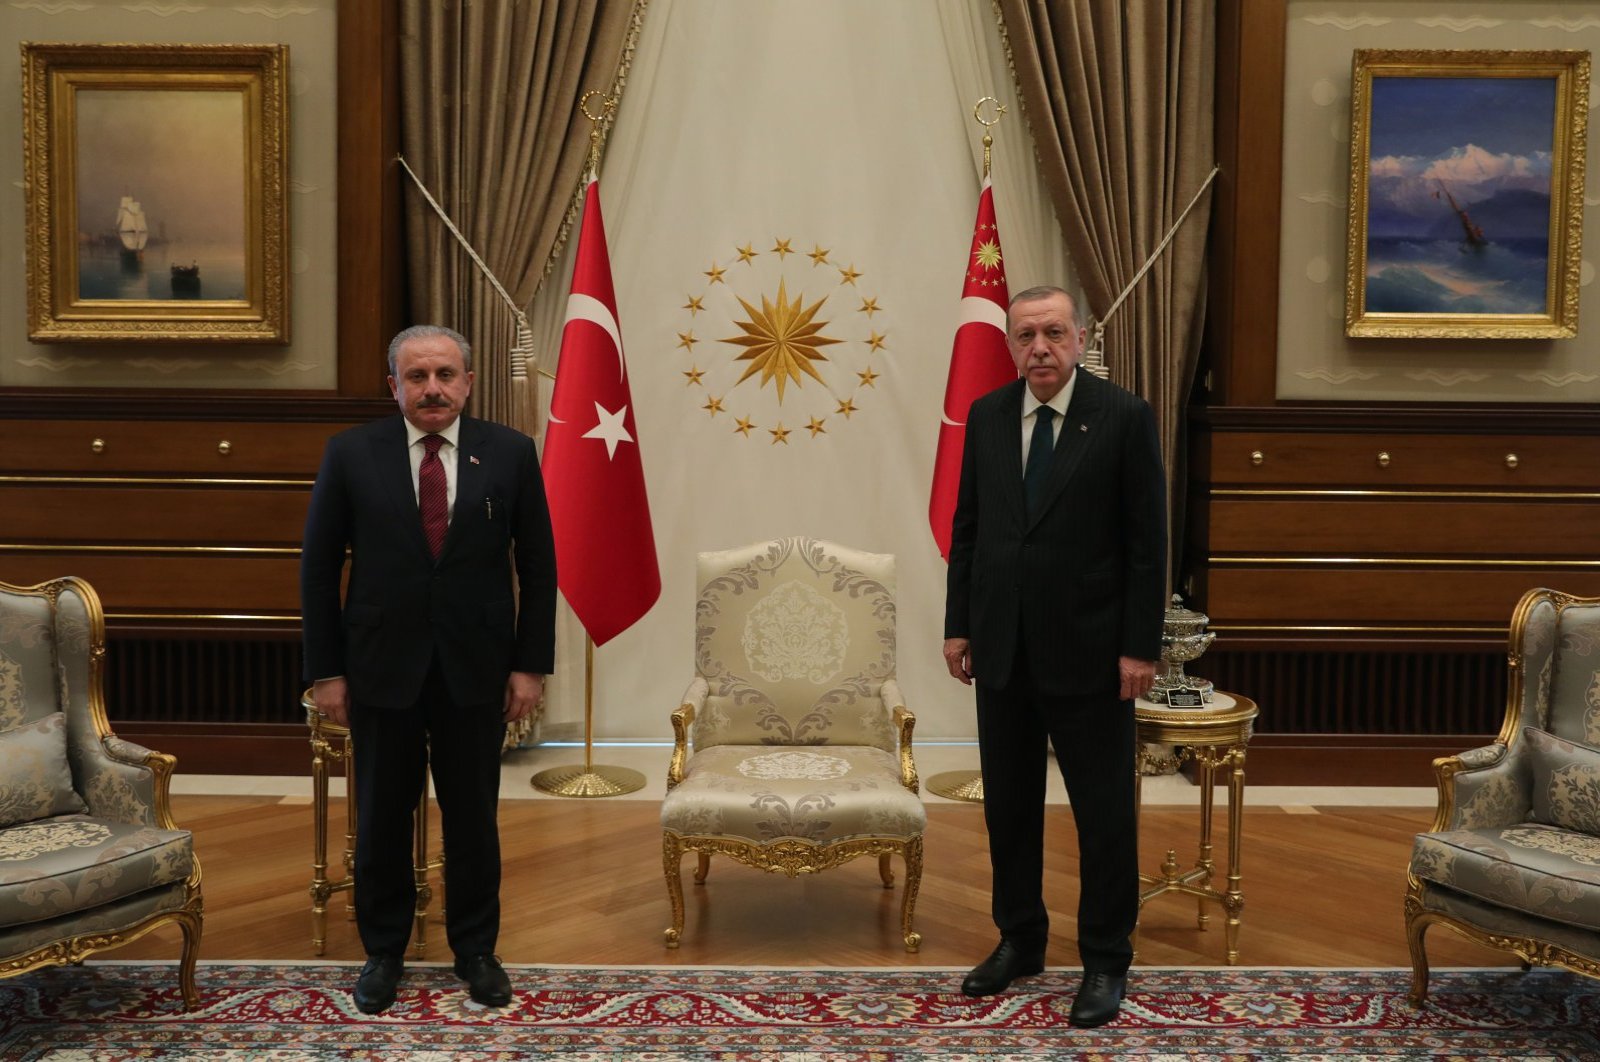 Parliament Speaker Mustafa Şentop is hosted by President Recep Tayyip Erdoğan at the presidential complex in the capital Ankara, June 17, 2020. (AA Photo)